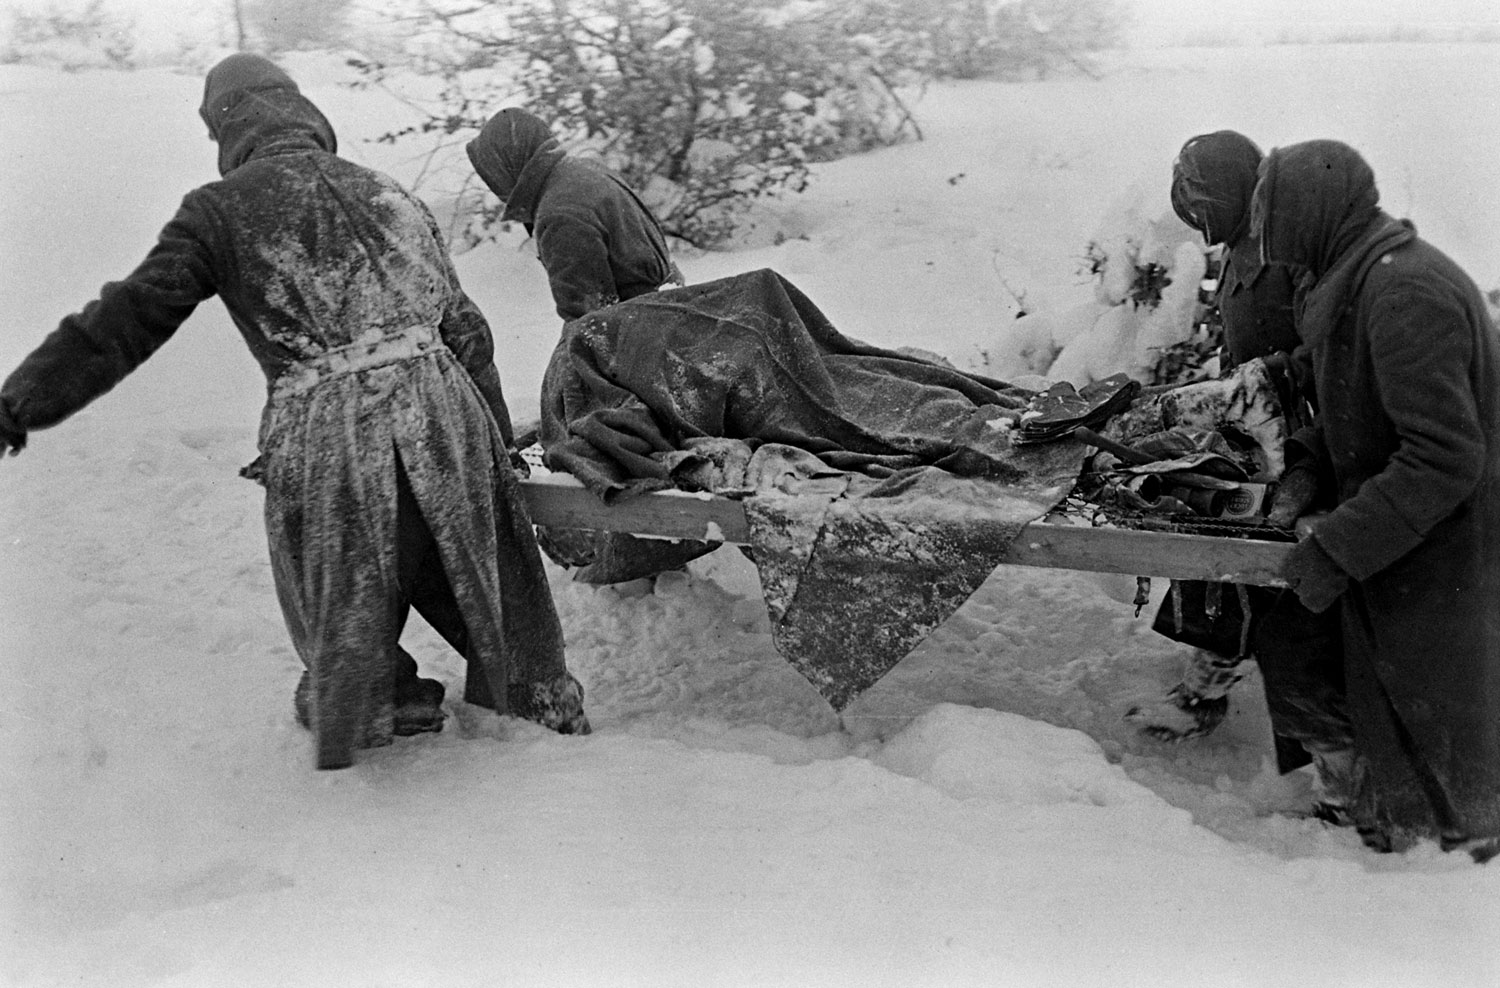 German POWs on grave-digging duty during the Battle of the Bulge.